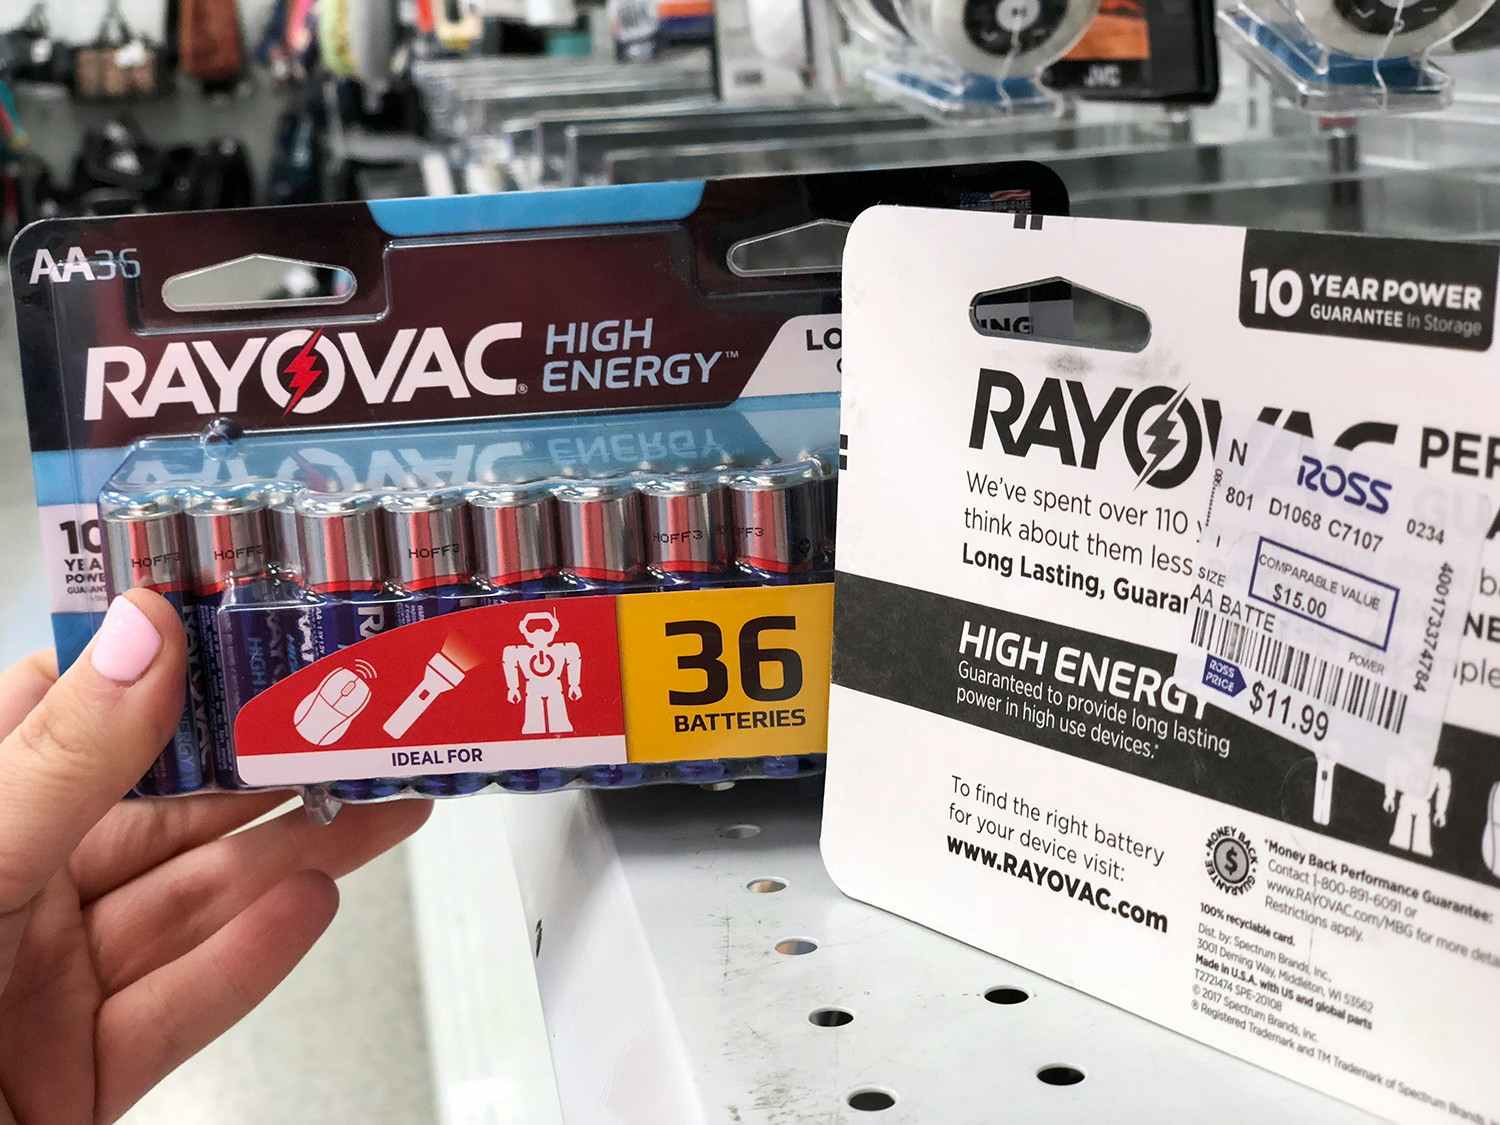 Rayovac batteries at Ross are 35% cheaper than Amazon.